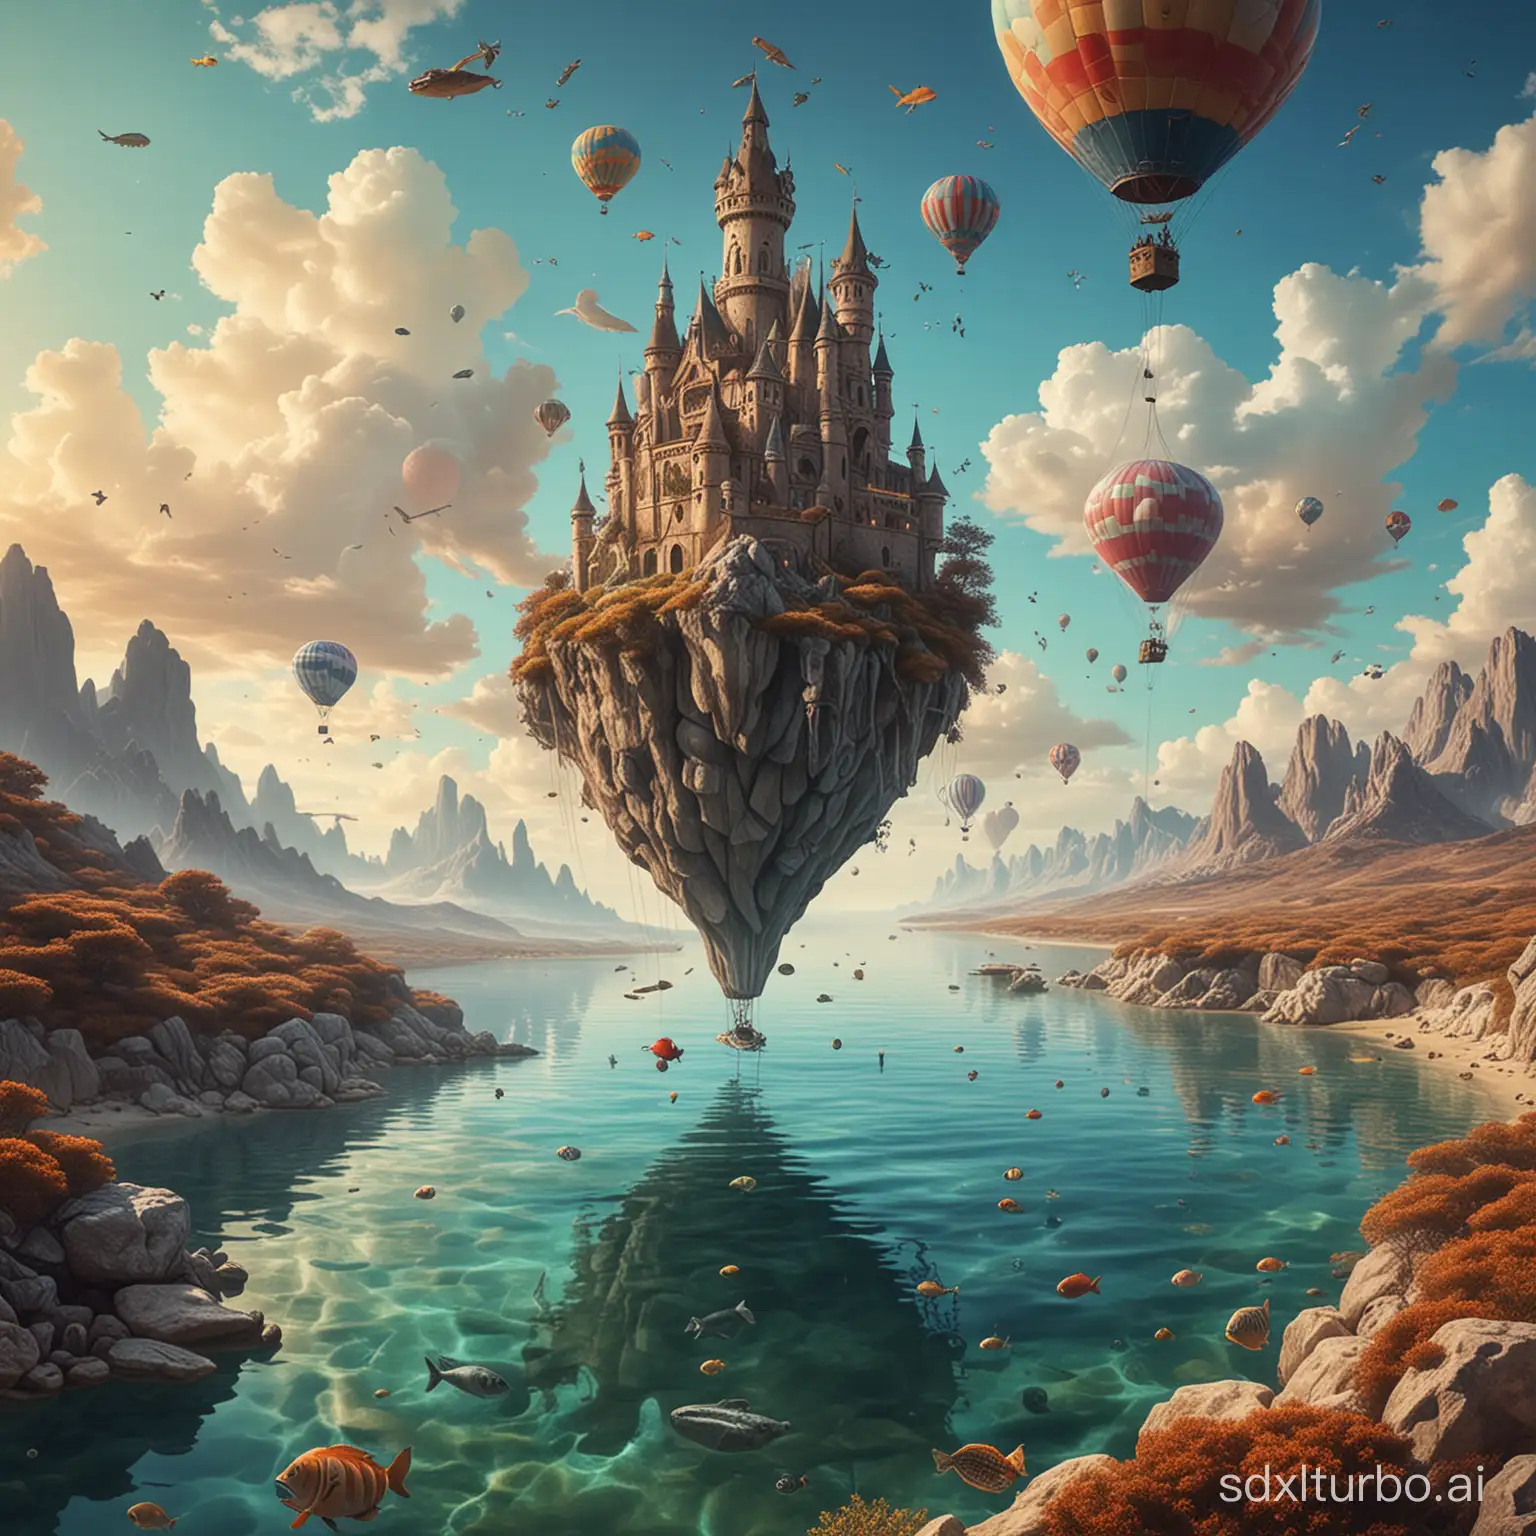 Surreal-Dreamscape-Whimsical-Wonderland-with-Floating-Islands-and-Ethereal-Figures